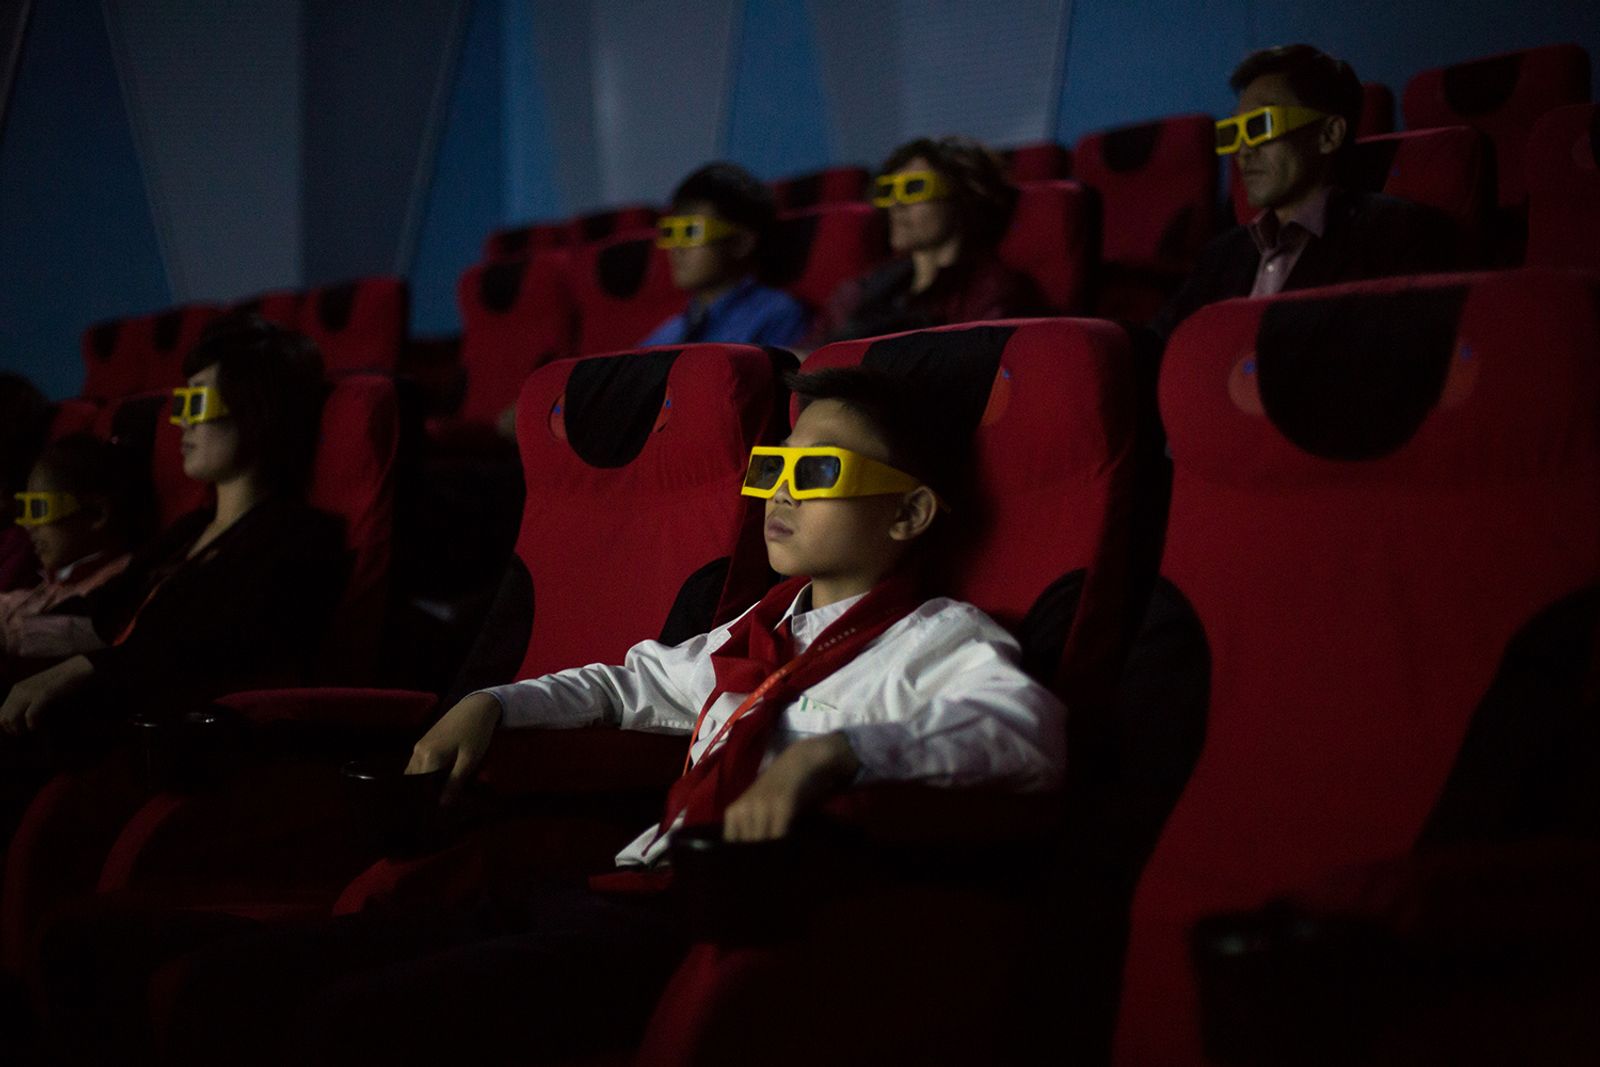 © Filippo Venturi - 4D cinema theatre inside the Science and Technology Building, in Pyongyang.